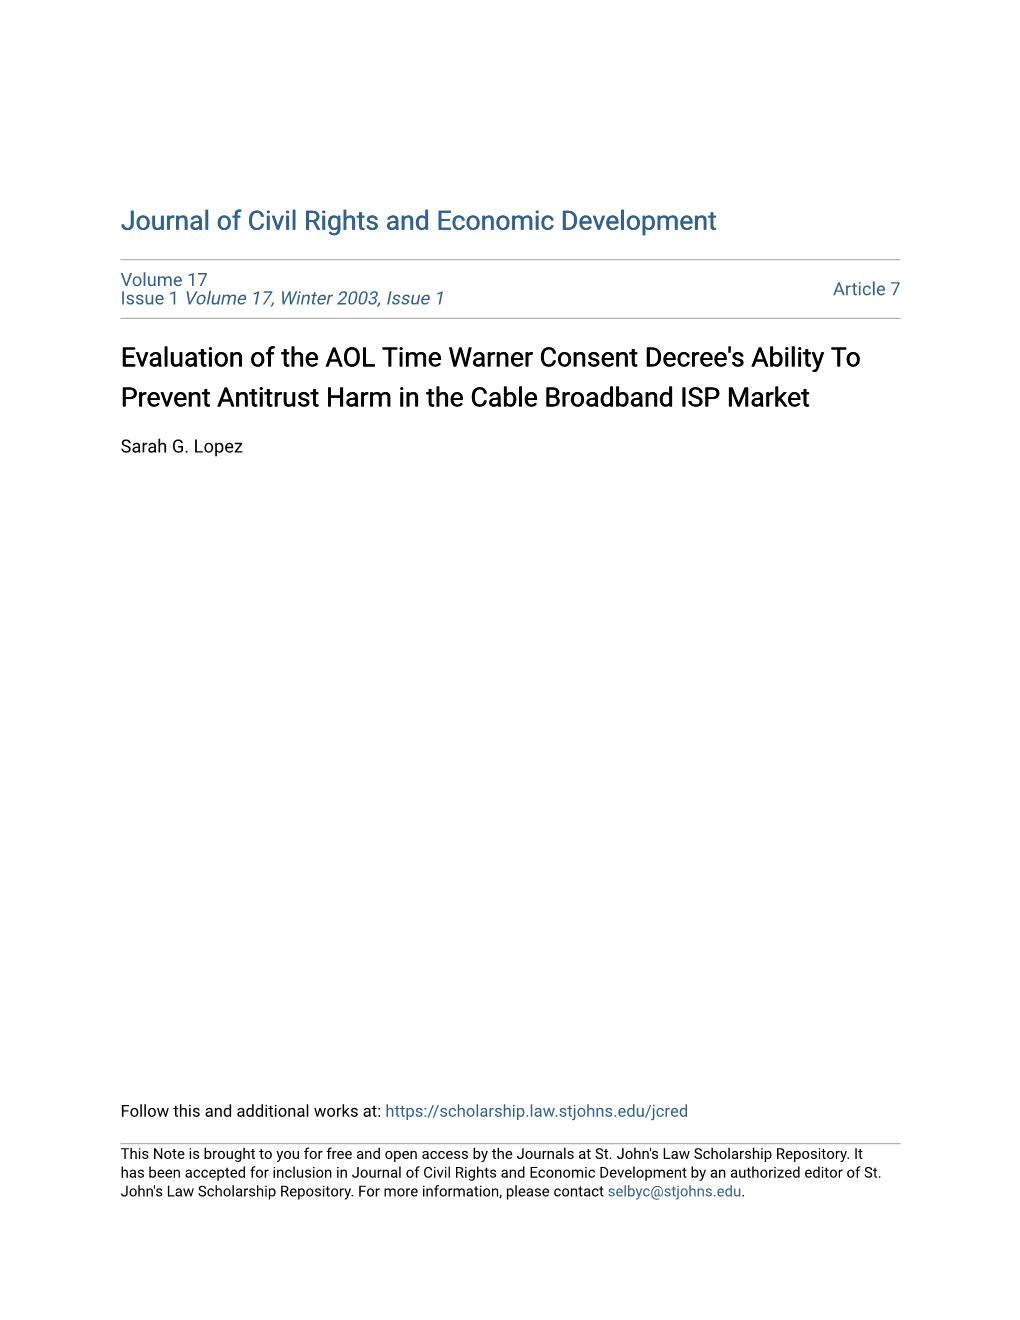 Evaluation of the AOL Time Warner Consent Decree's Ability to Prevent Antitrust Harm in the Cable Broadband ISP Market